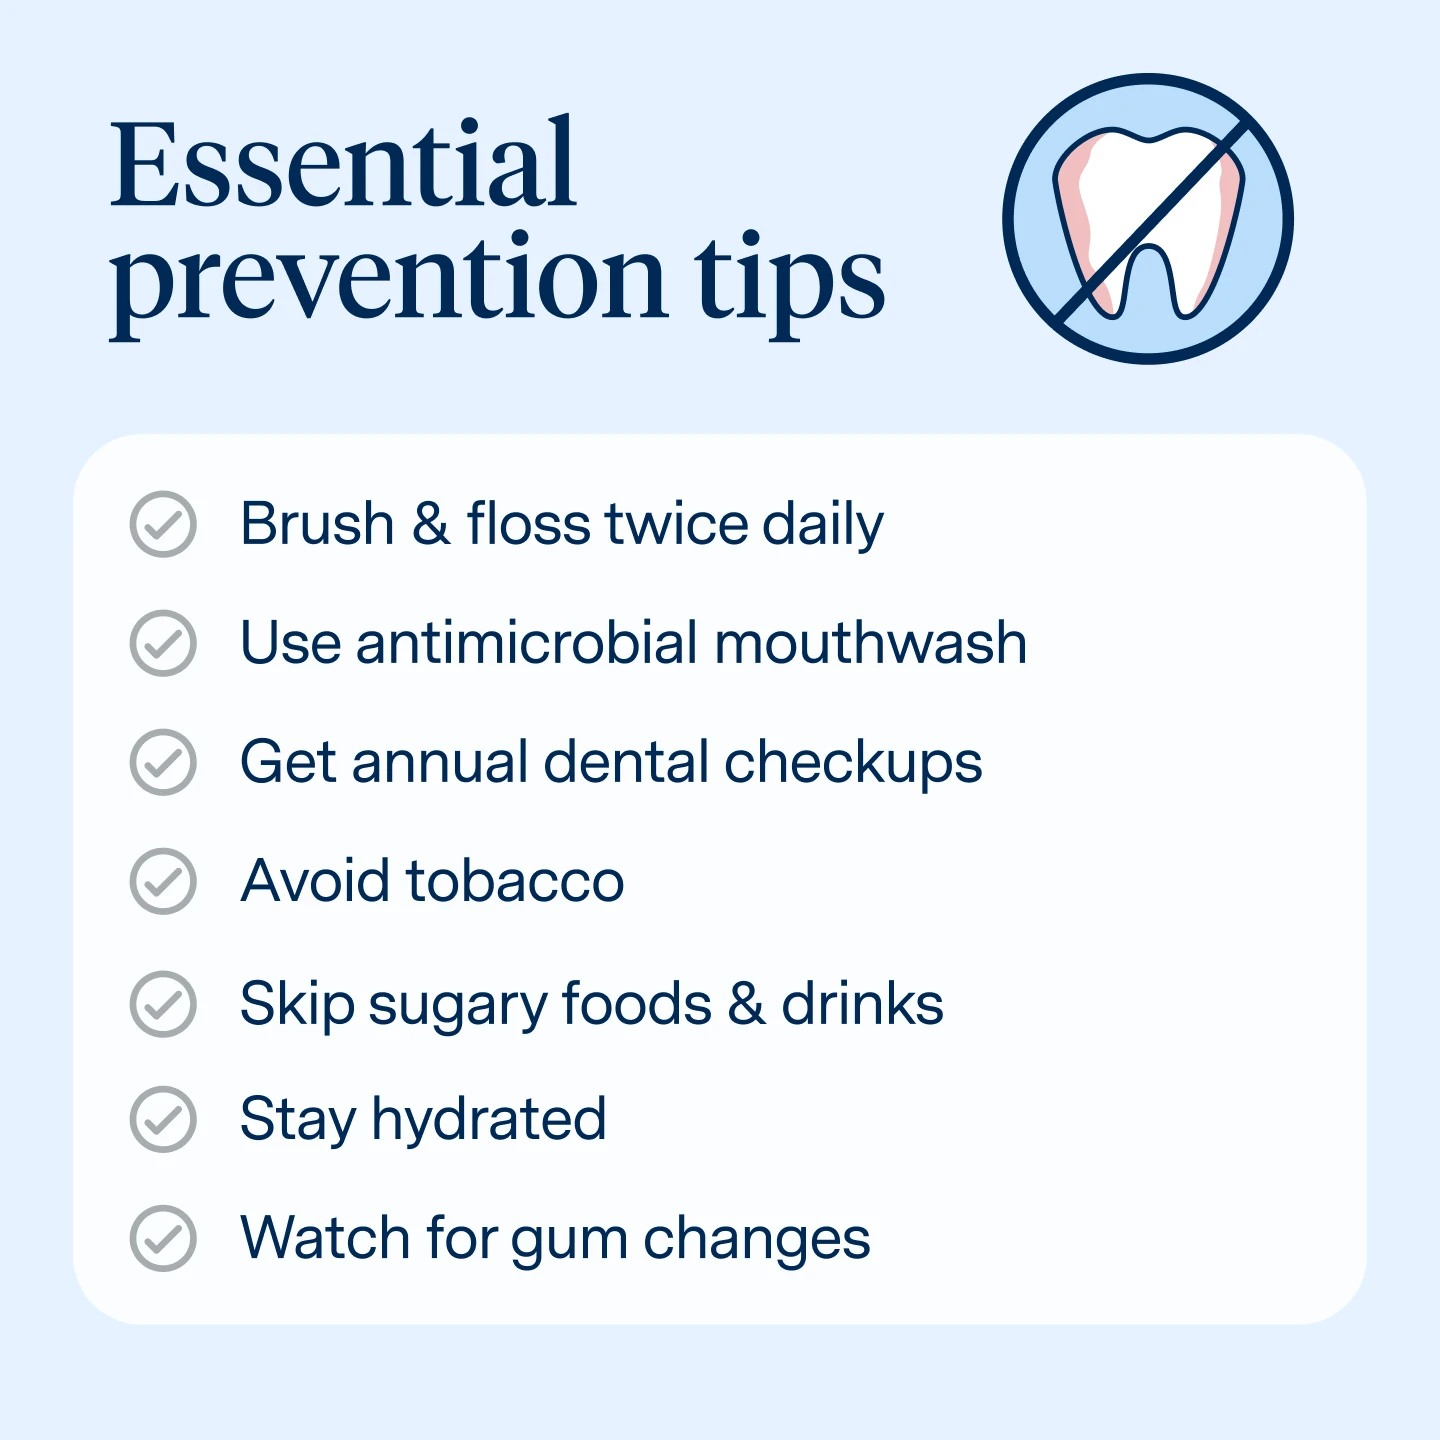 How to prevent gum disease
Brush & floss twice daily
Use antimicrobial mouthwash
Get annual dental checkups
Avoid tobacco
Skip sugary foods & drinks
Stay hydrated
Watch for gum changes